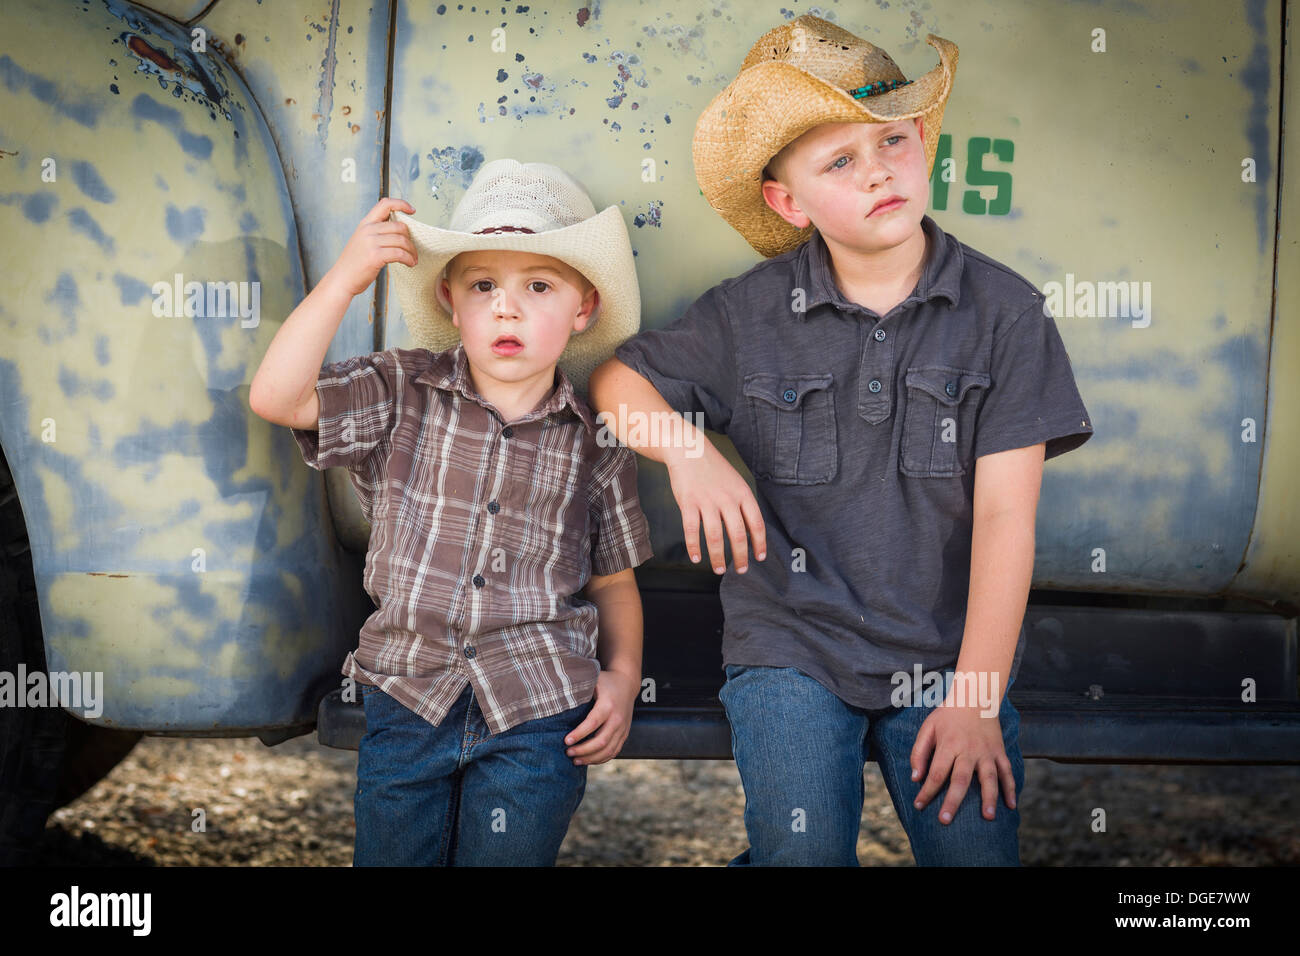 Two Young Boys Wearing Cowboy Hats Leaning Against an Antique Truck in a Rustic Country Setting. Stock Photo